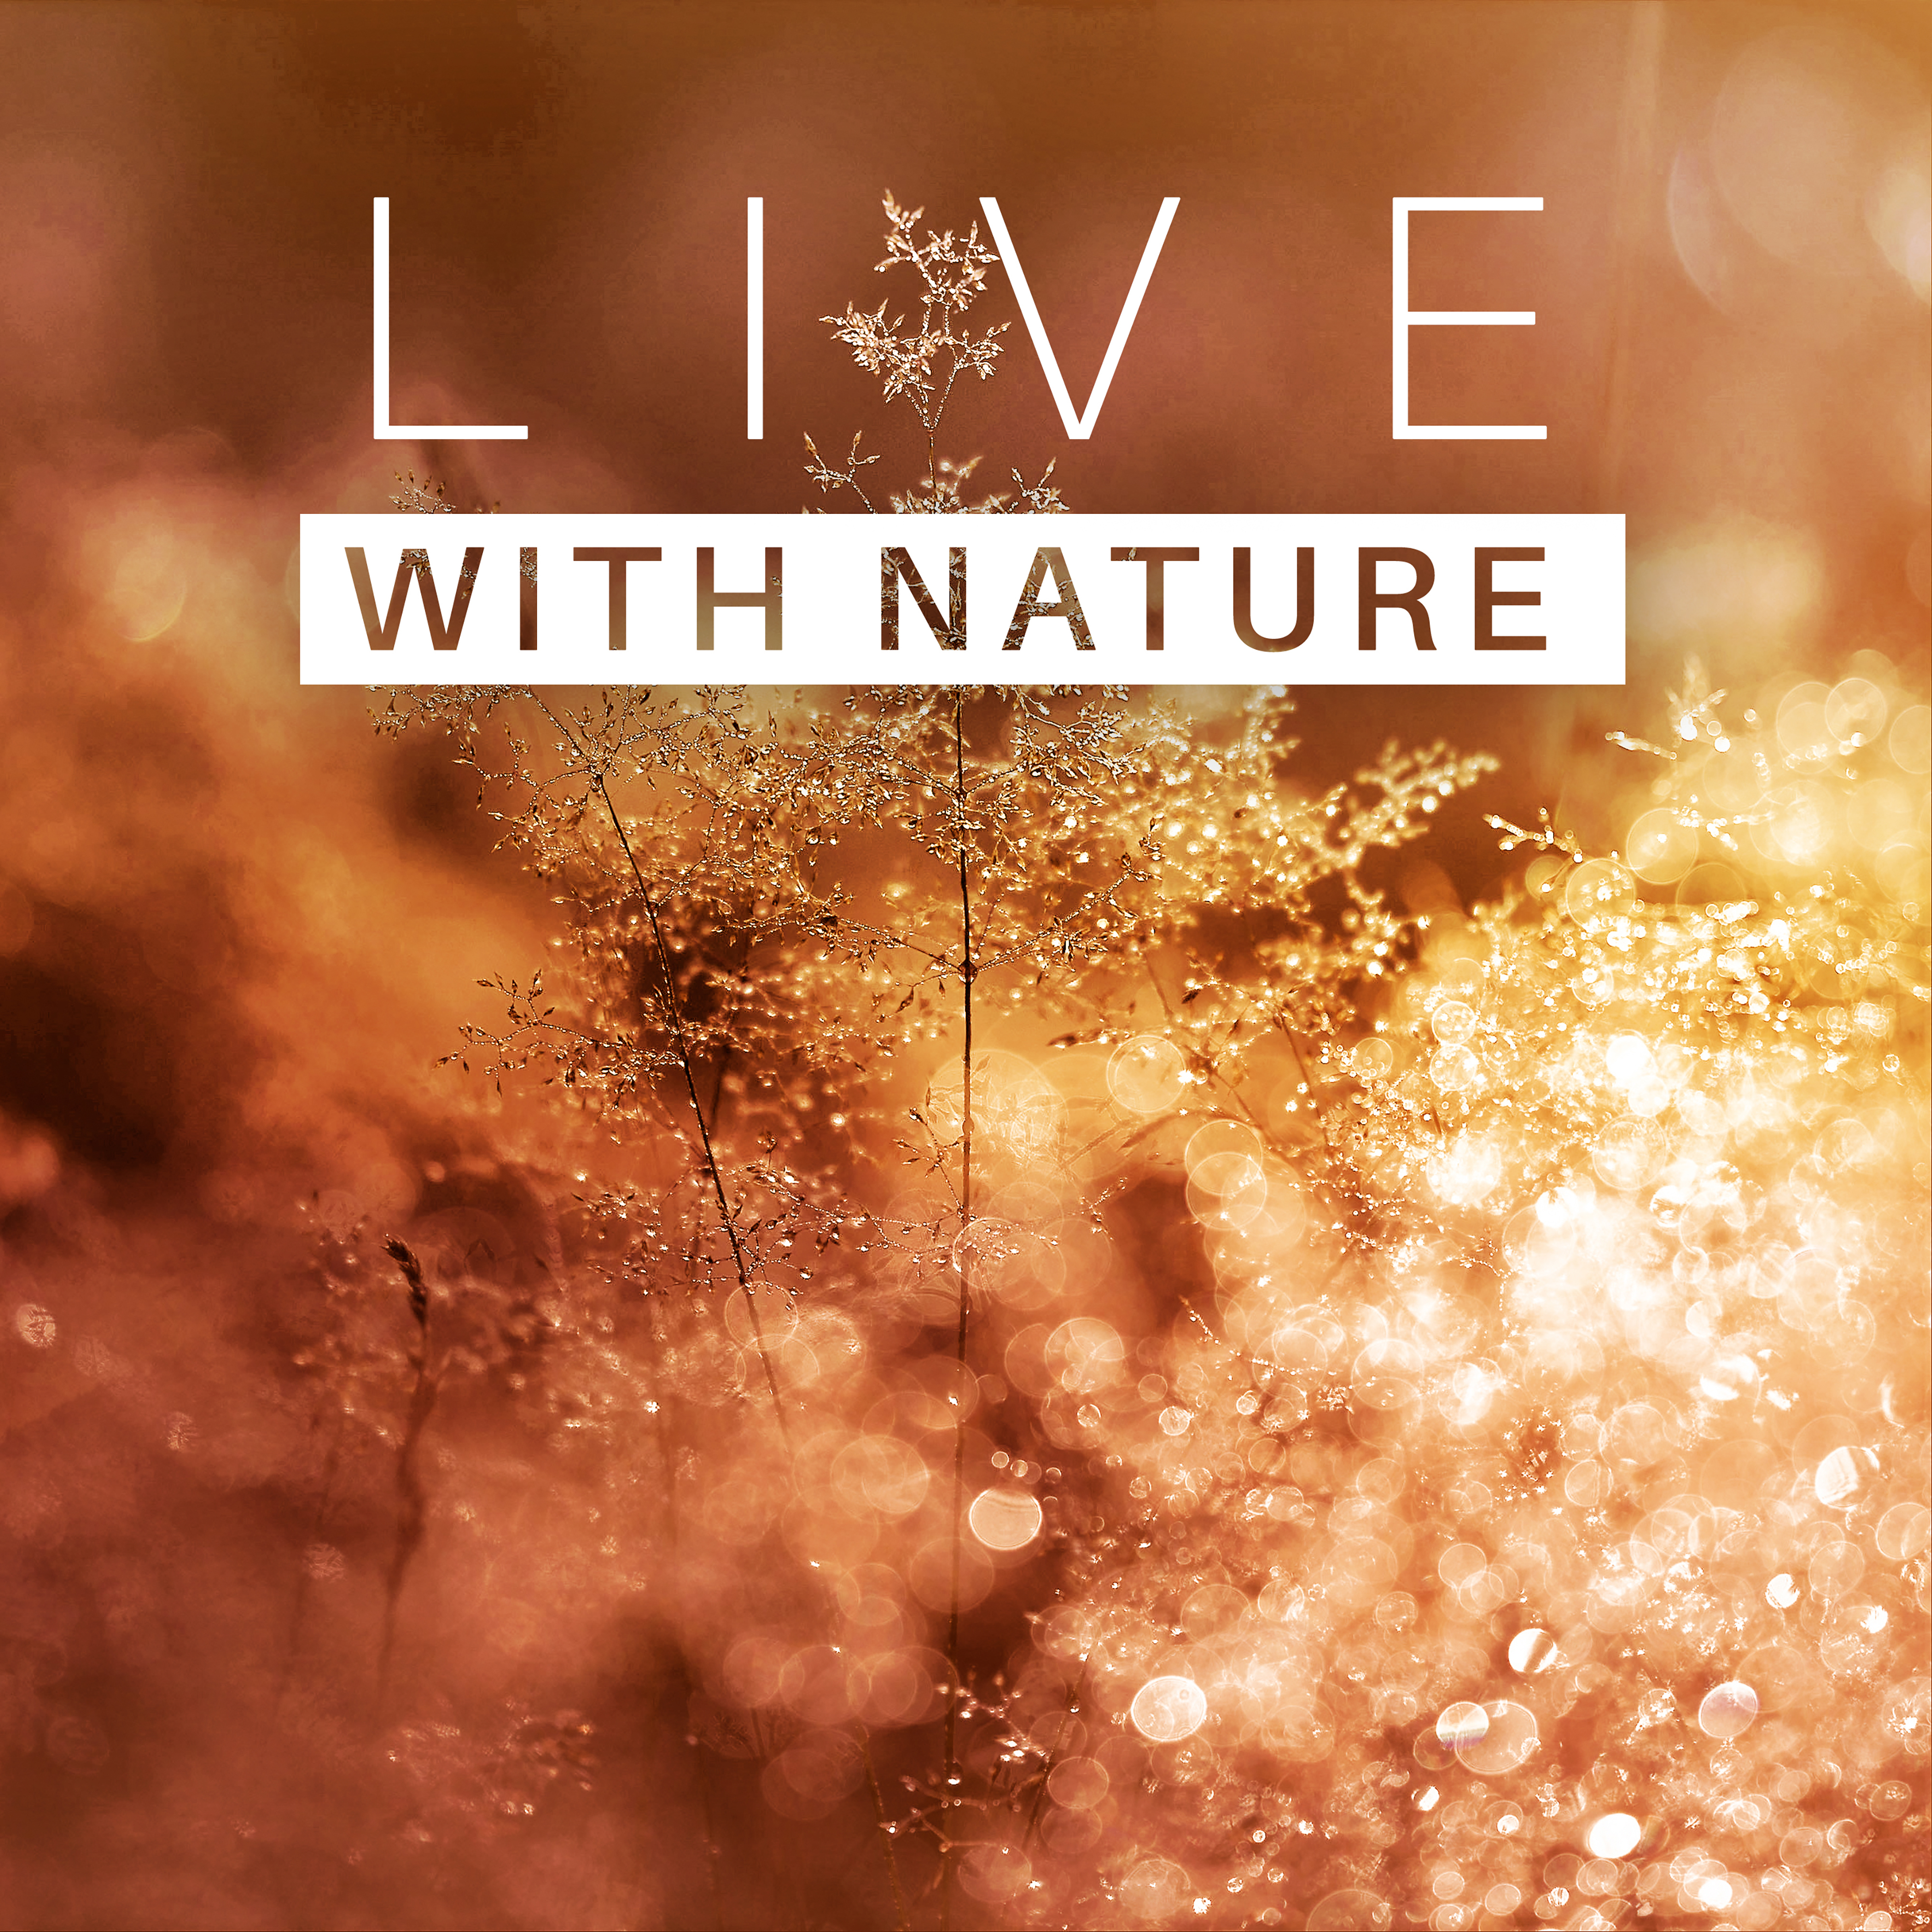 Live with Nature  Peaceful Music for Relaxation, Stress Free, Mind Power, Nature Sounds to Calm Down, Relaxing Waves